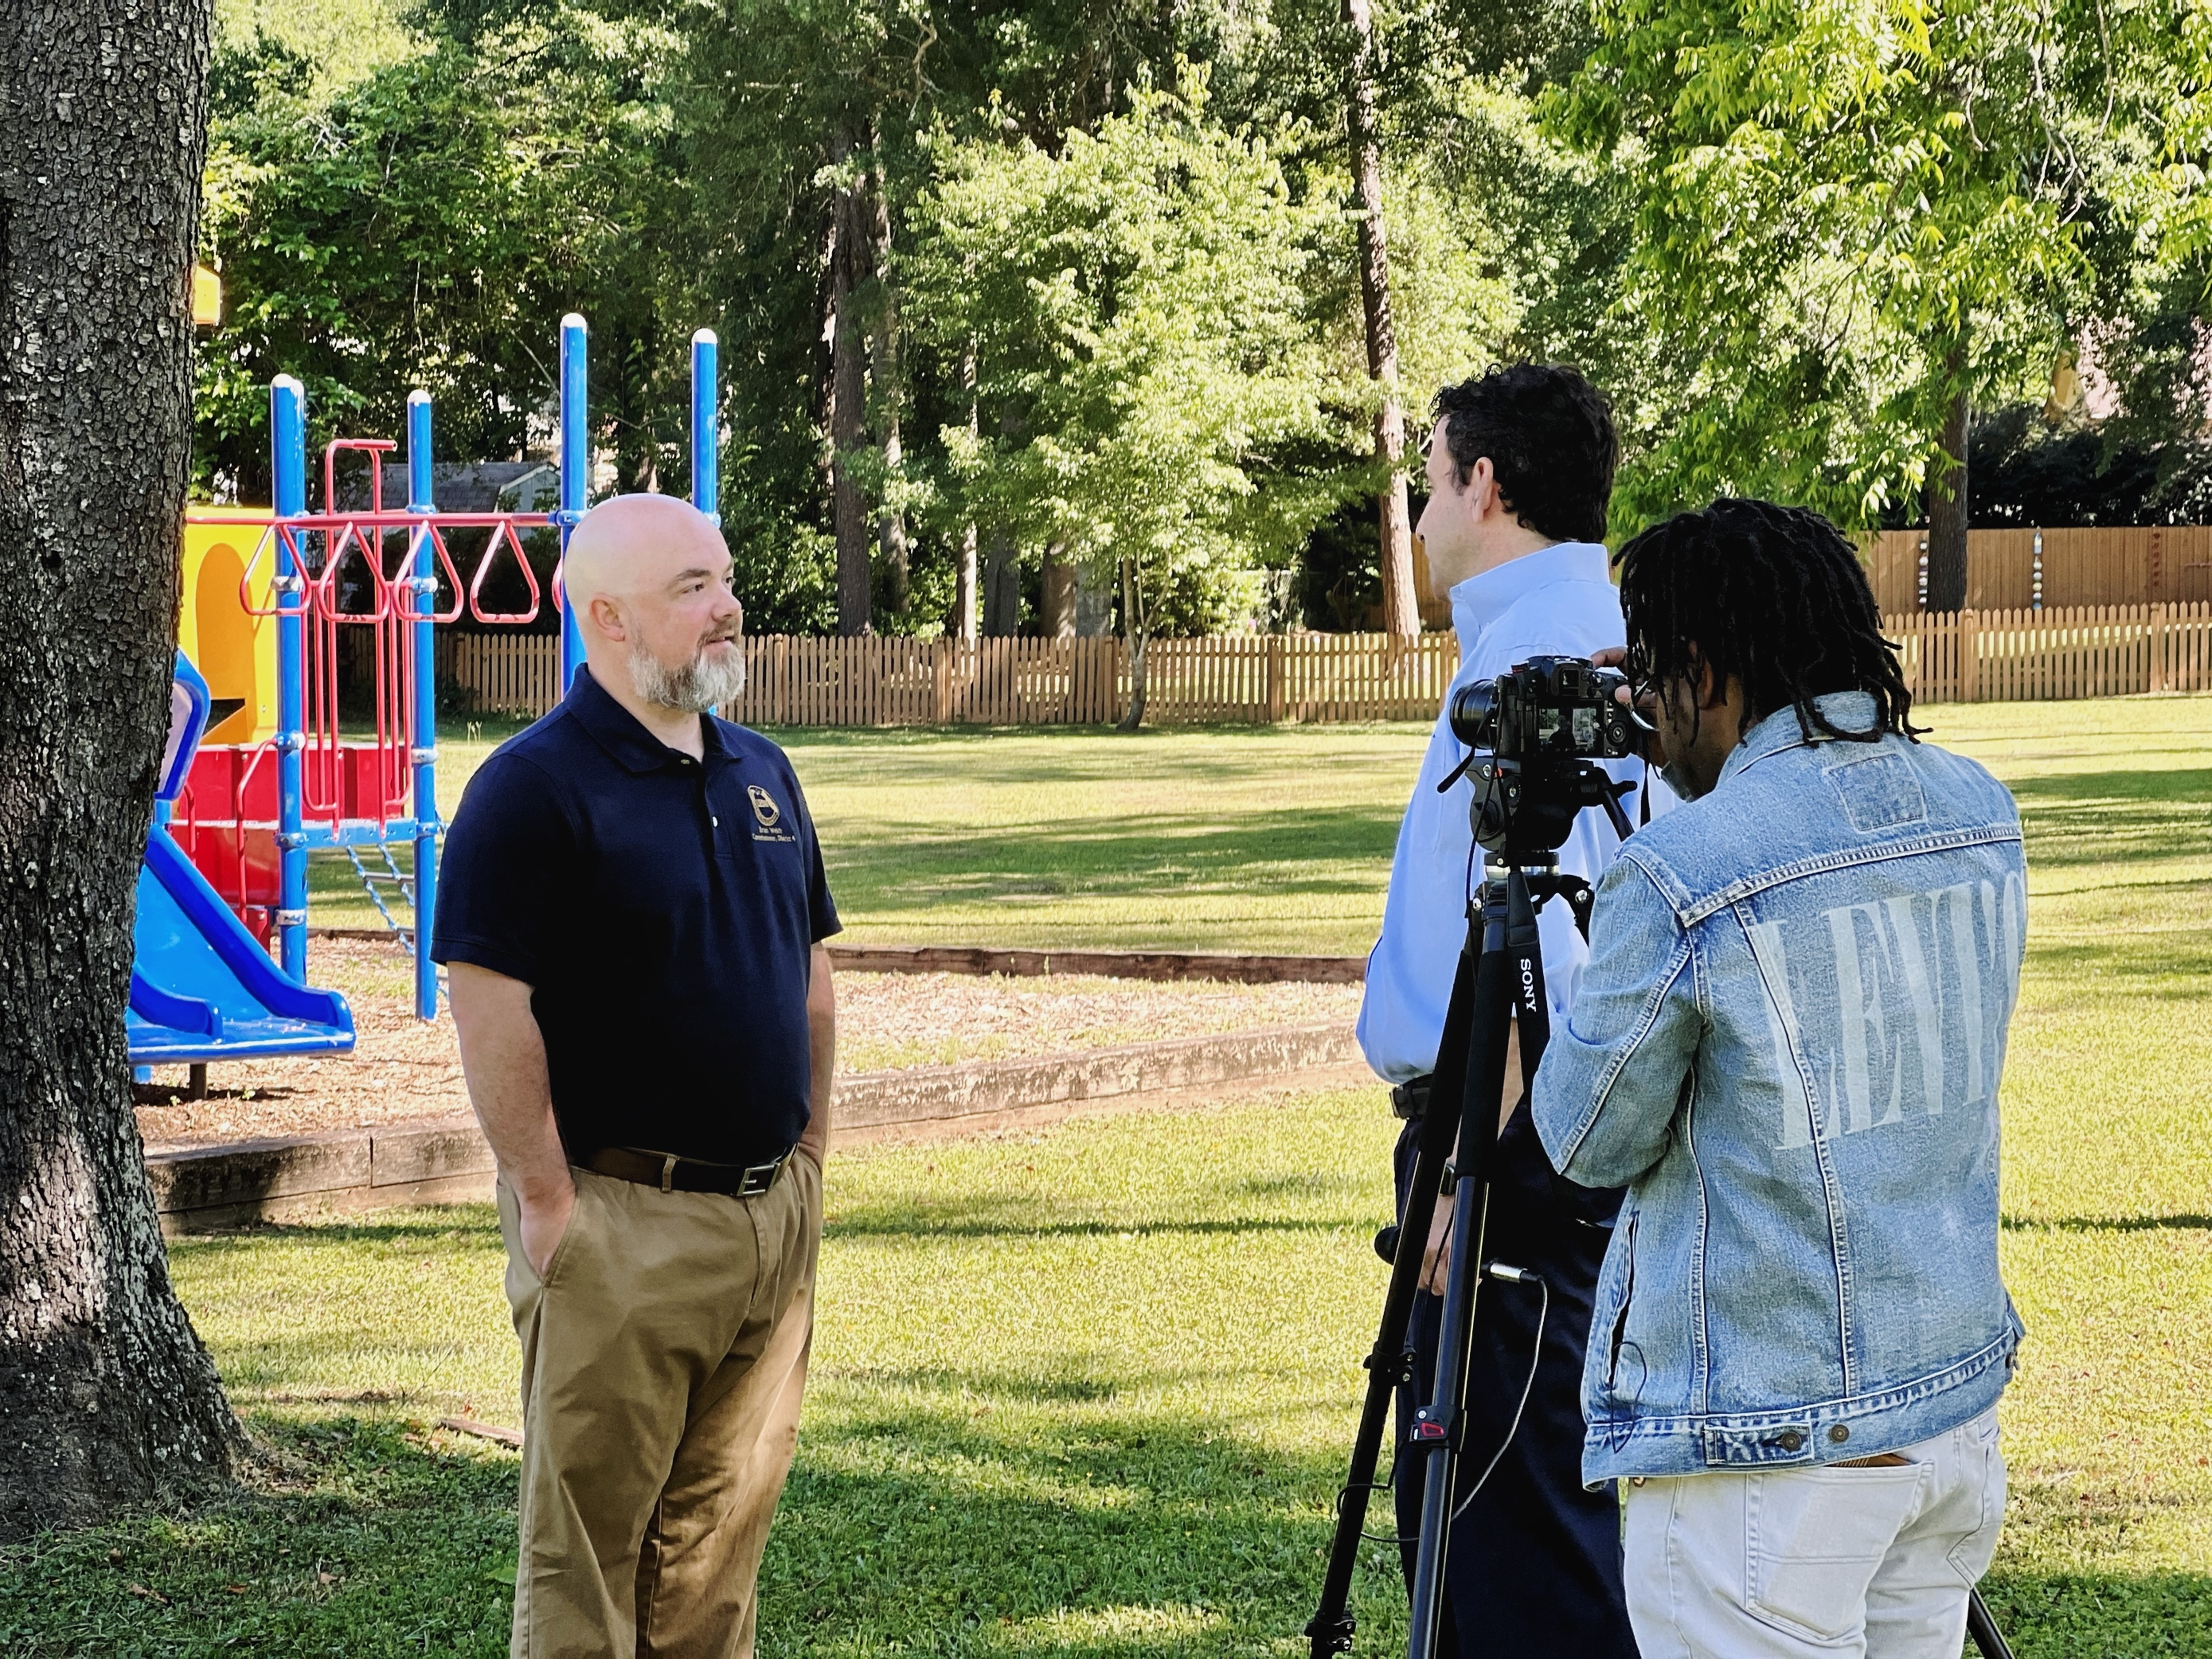 Giving an interview on the new Killearn Acres parks after the County assumed ownership